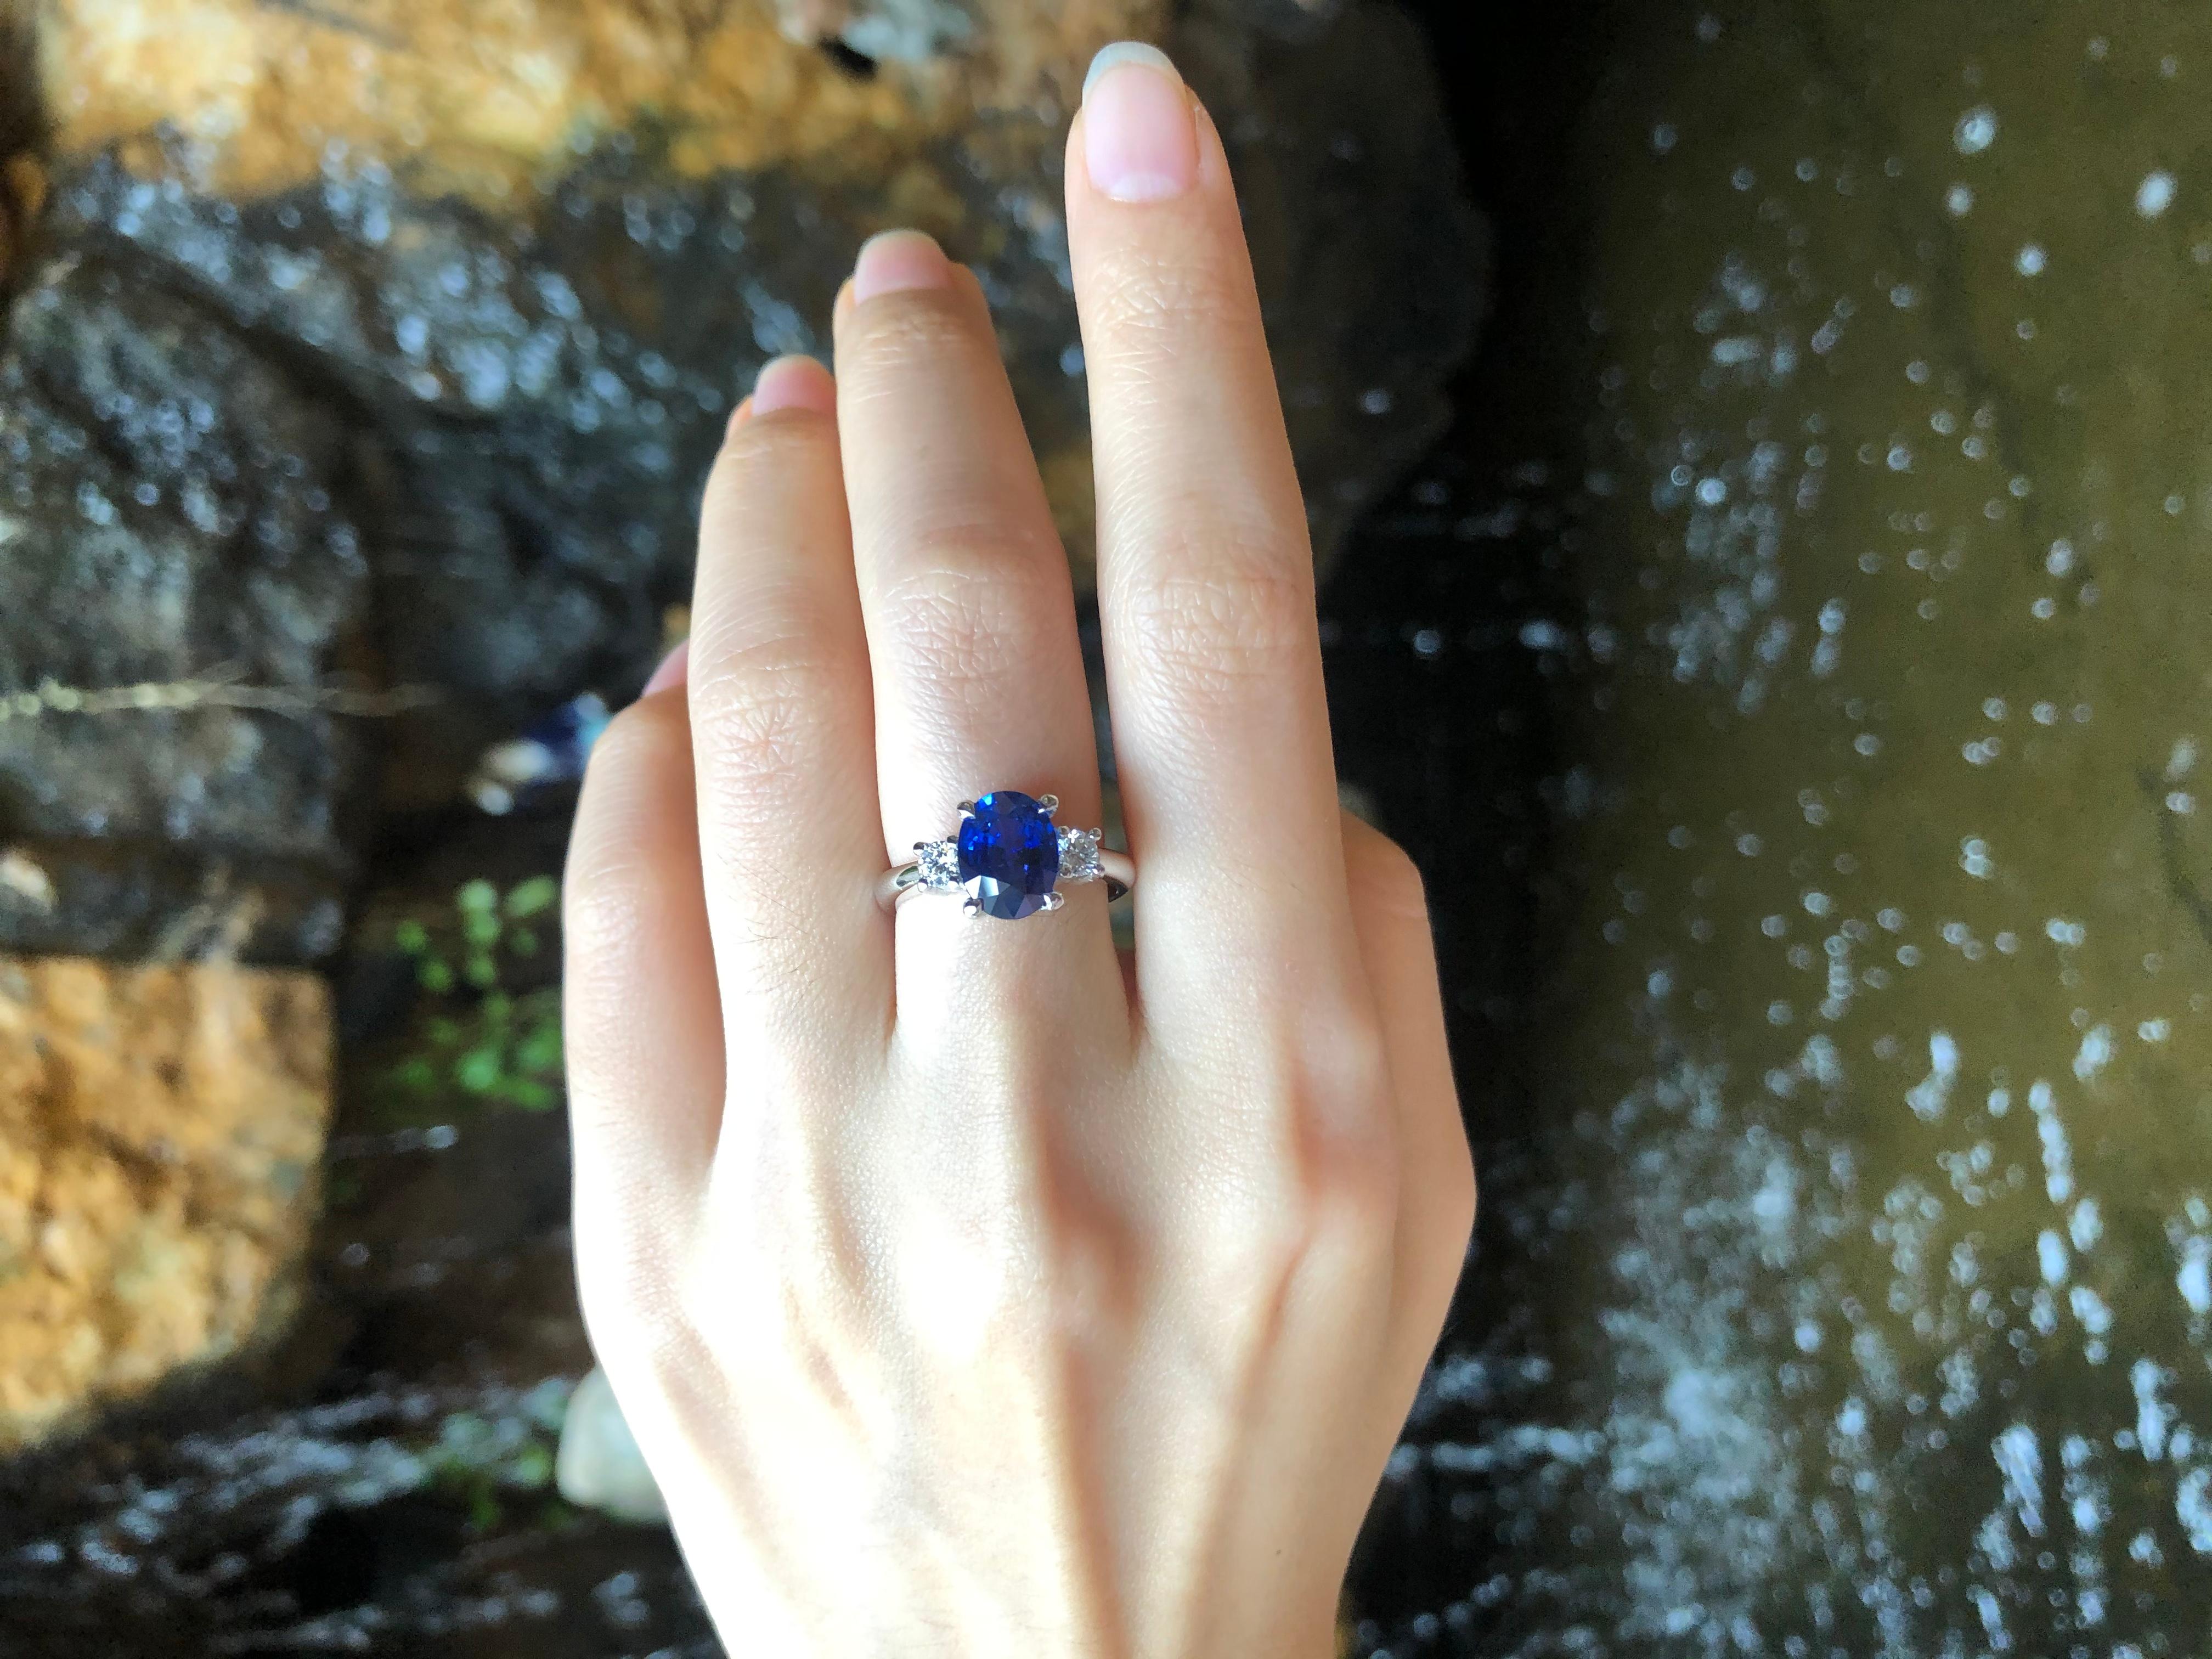 Royal Blue Sapphire 2.47 carats with Diamond 0.29 carat Ring set in Platinum 950 Settings
(Bellerophon Gemlab Report)

Width:  1.4 cm 
Length: 0.9 cm
Ring Size: 54
Total Weight: 8.7 grams

